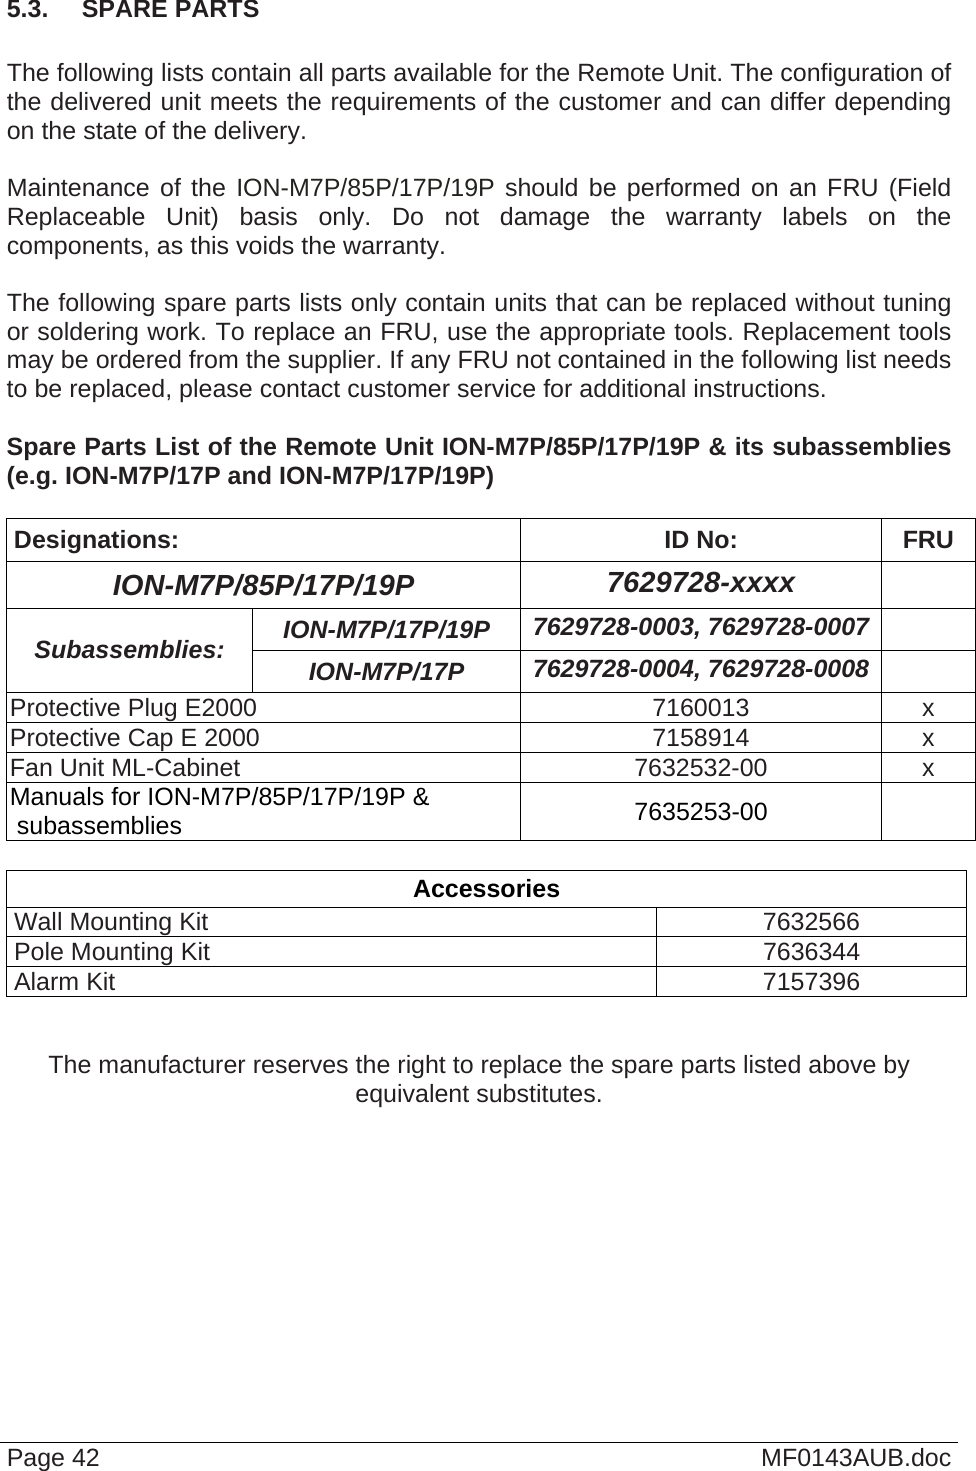  Page 42  MF0143AUB.doc 5.3.  SPARE PARTS  The following lists contain all parts available for the Remote Unit. The configuration of the delivered unit meets the requirements of the customer and can differ depending on the state of the delivery.  Maintenance of the ION-M7P/85P/17P/19P should be performed on an FRU (Field Replaceable Unit) basis only. Do not damage the warranty labels on the components, as this voids the warranty.   The following spare parts lists only contain units that can be replaced without tuning or soldering work. To replace an FRU, use the appropriate tools. Replacement tools may be ordered from the supplier. If any FRU not contained in the following list needs to be replaced, please contact customer service for additional instructions.  Spare Parts List of the Remote Unit ION-M7P/85P/17P/19P &amp; its subassemblies (e.g. ION-M7P/17P and ION-M7P/17P/19P)  Designations: ID No: FRU ION-M7P/85P/17P/19P  7629728-xxxx   ION-M7P/17P/19P  7629728-0003, 7629728-0007   Subassemblies:  ION-M7P/17P  7629728-0004, 7629728-0008   Protective Plug E2000  7160013  x Protective Cap E 2000  7158914  x Fan Unit ML-Cabinet  7632532-00  x Manuals for ION-M7P/85P/17P/19P &amp;  subassemblies  7635253-00   Accessories Wall Mounting Kit  7632566 Pole Mounting Kit  7636344 Alarm Kit  7157396  The manufacturer reserves the right to replace the spare parts listed above by equivalent substitutes. 